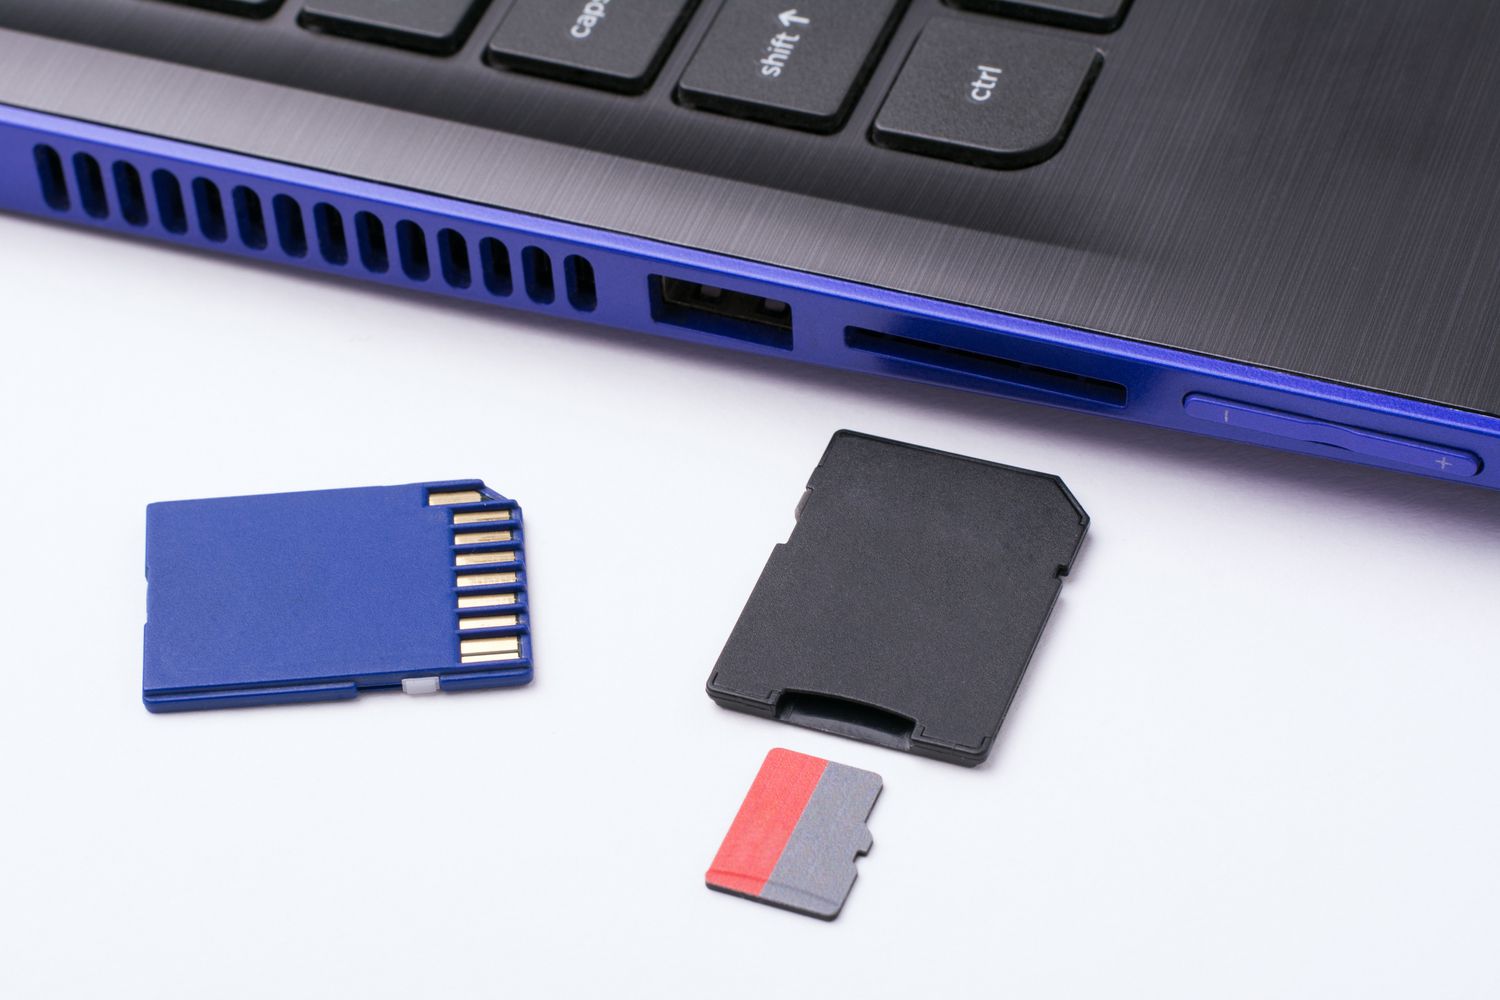 Connecting A SIM Card To A Laptop